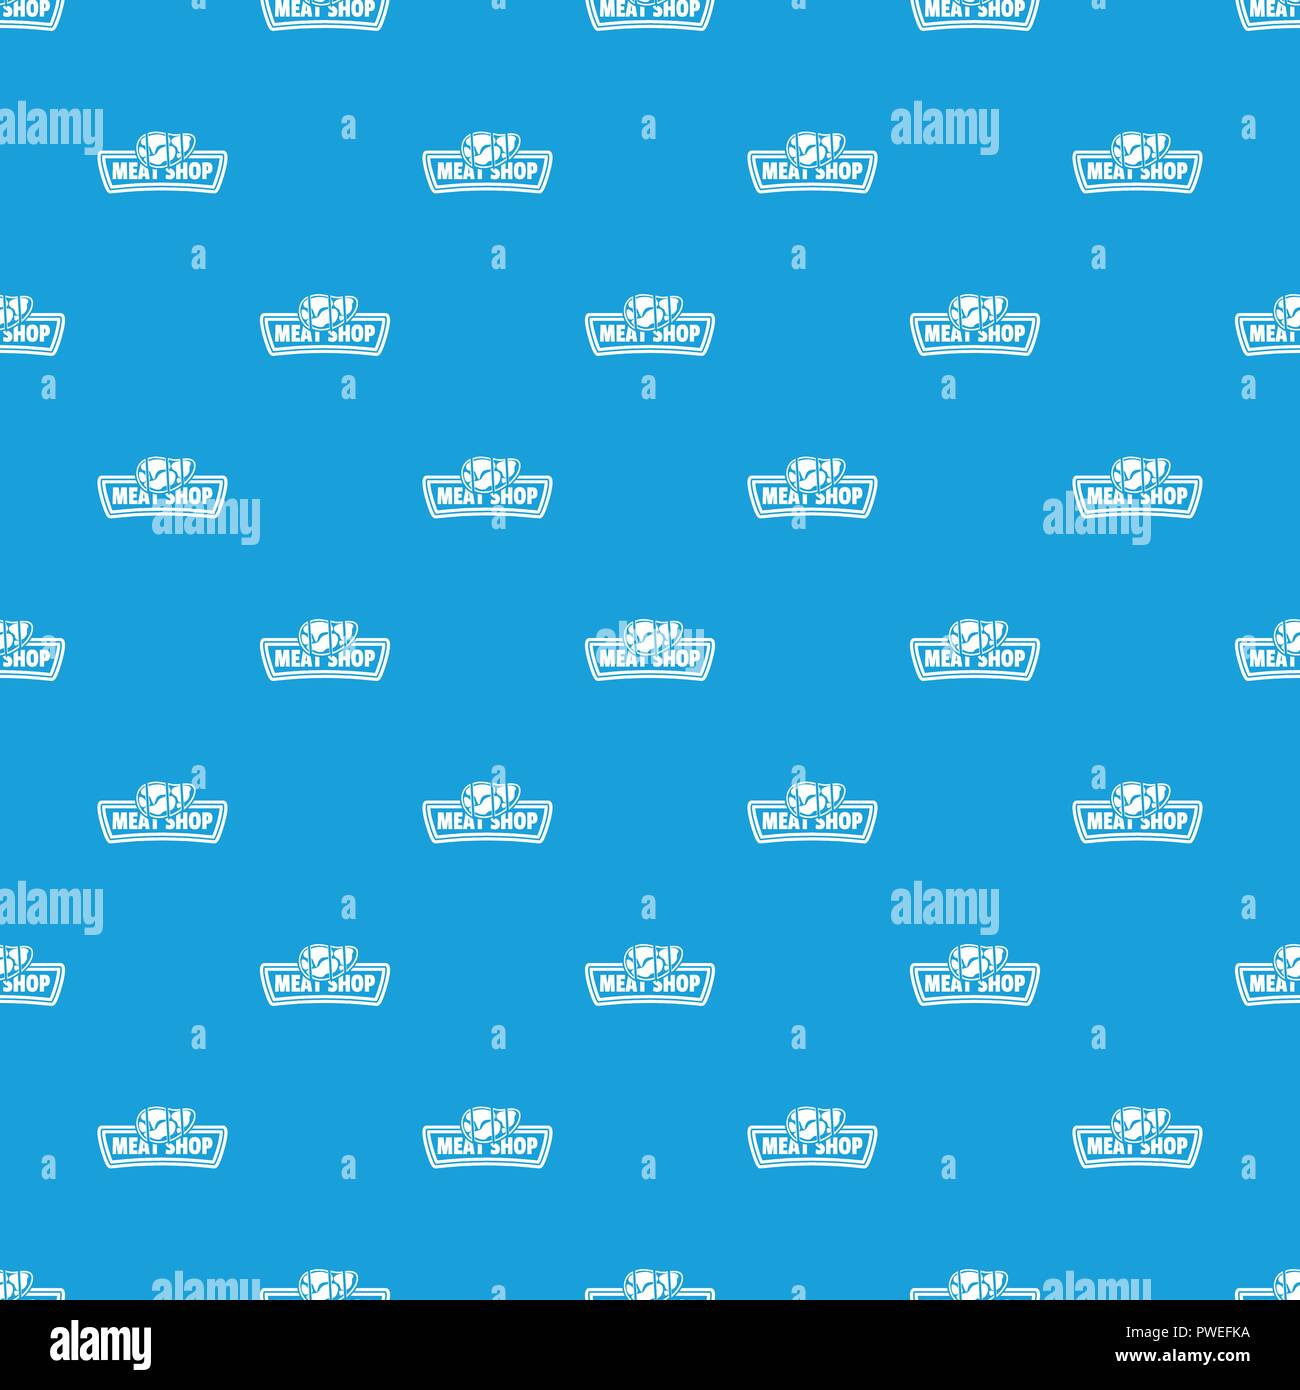 Meat shop pattern vector seamless blue Stock Vector